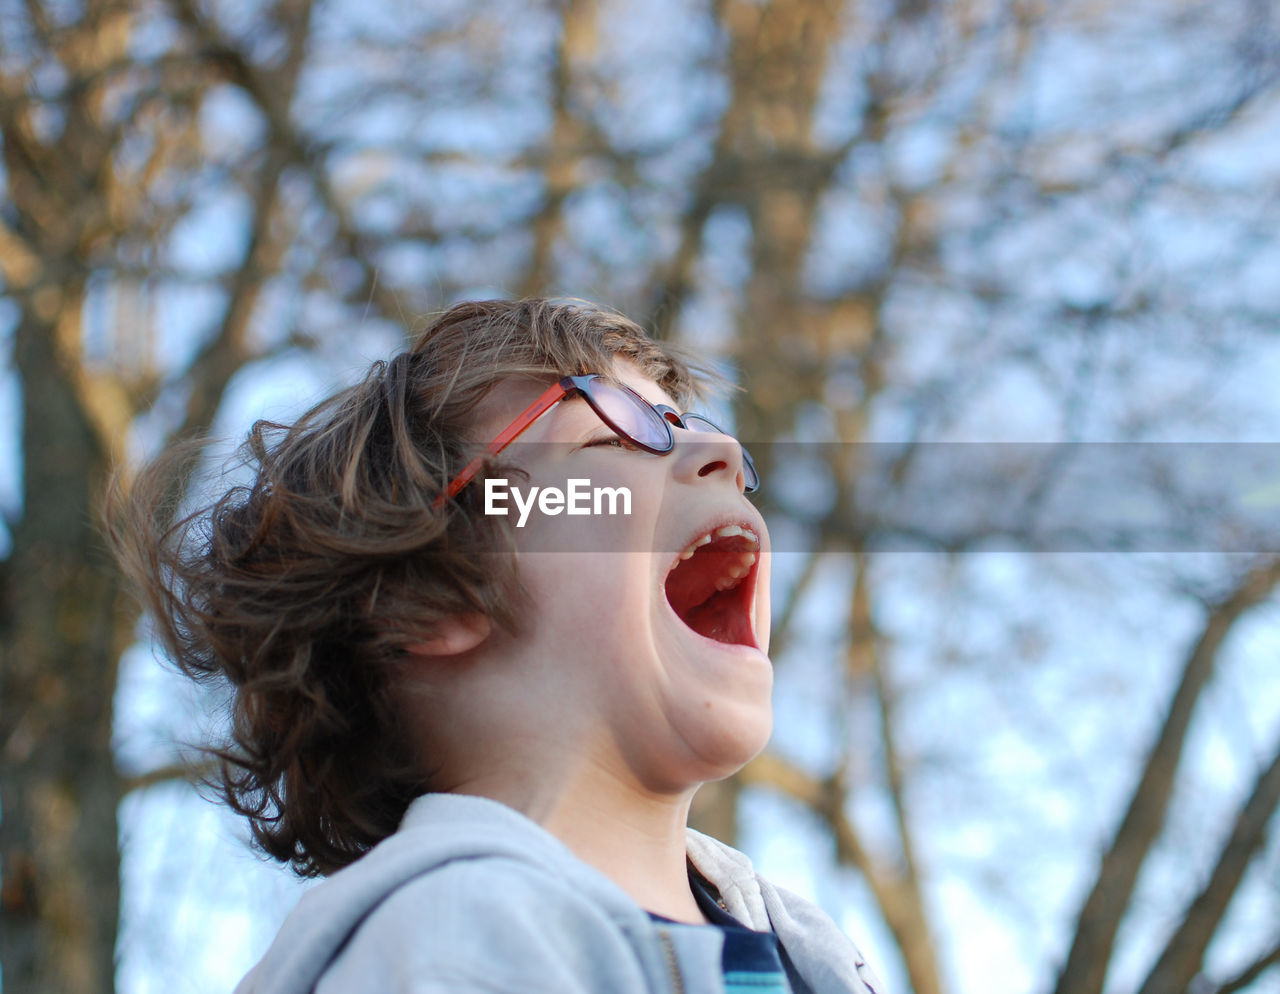 Close-up of boy screaming while standing against bare trees